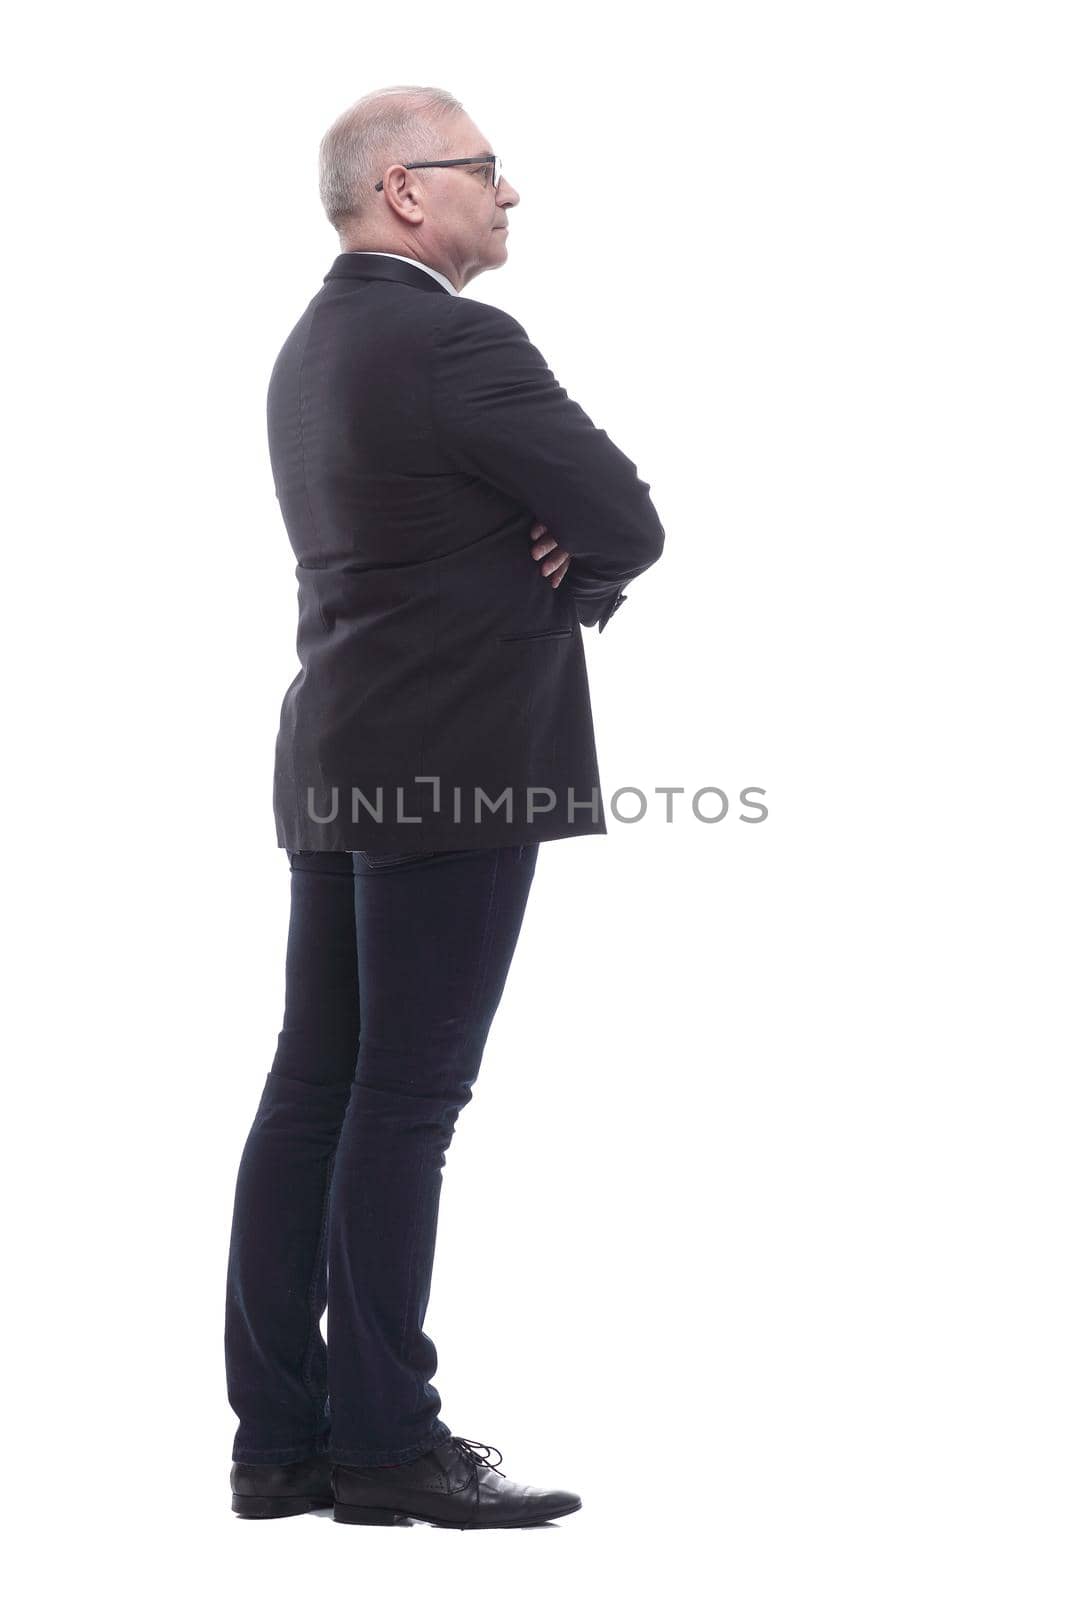 side view. serious business man looking ahead. isolated on a white background